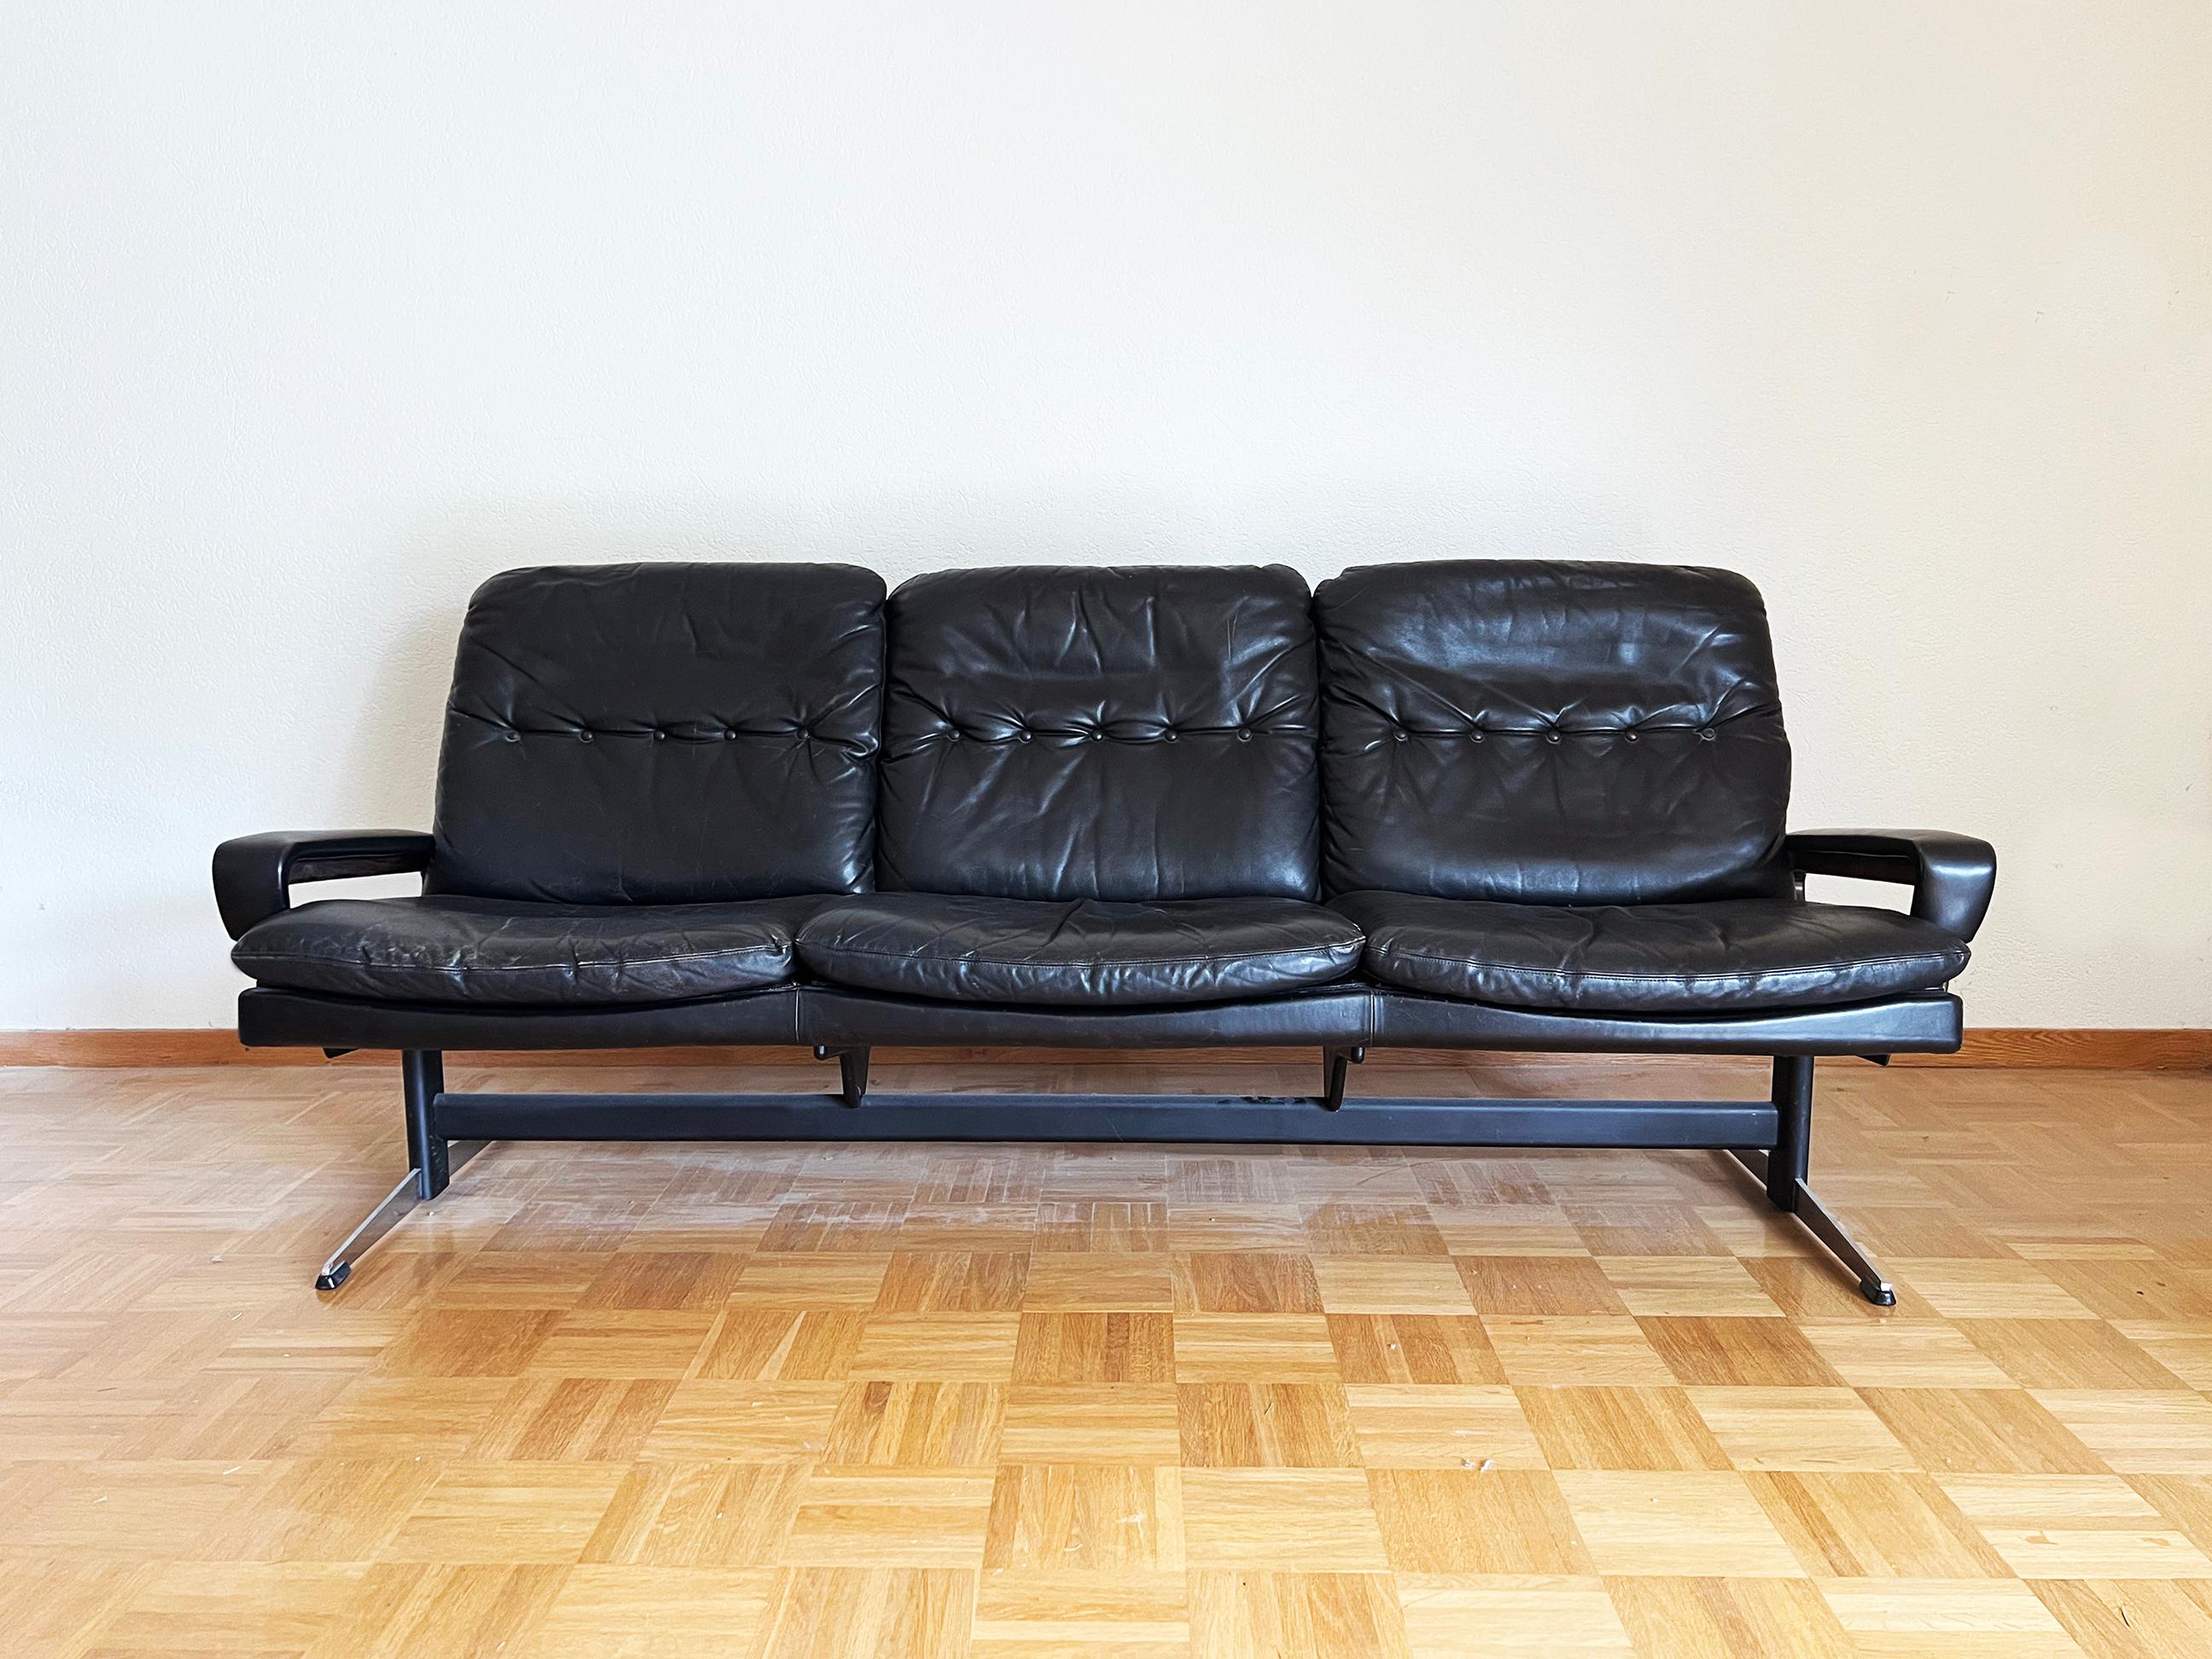 Very excellent vintage condition! All original and only lightly used. 

This Sofa Model King designed by André Vandenbeuck for the Swiss manufacturer Strässle in the 1970s is a cult classic, icon of global design. 

The rose teak detailing with the